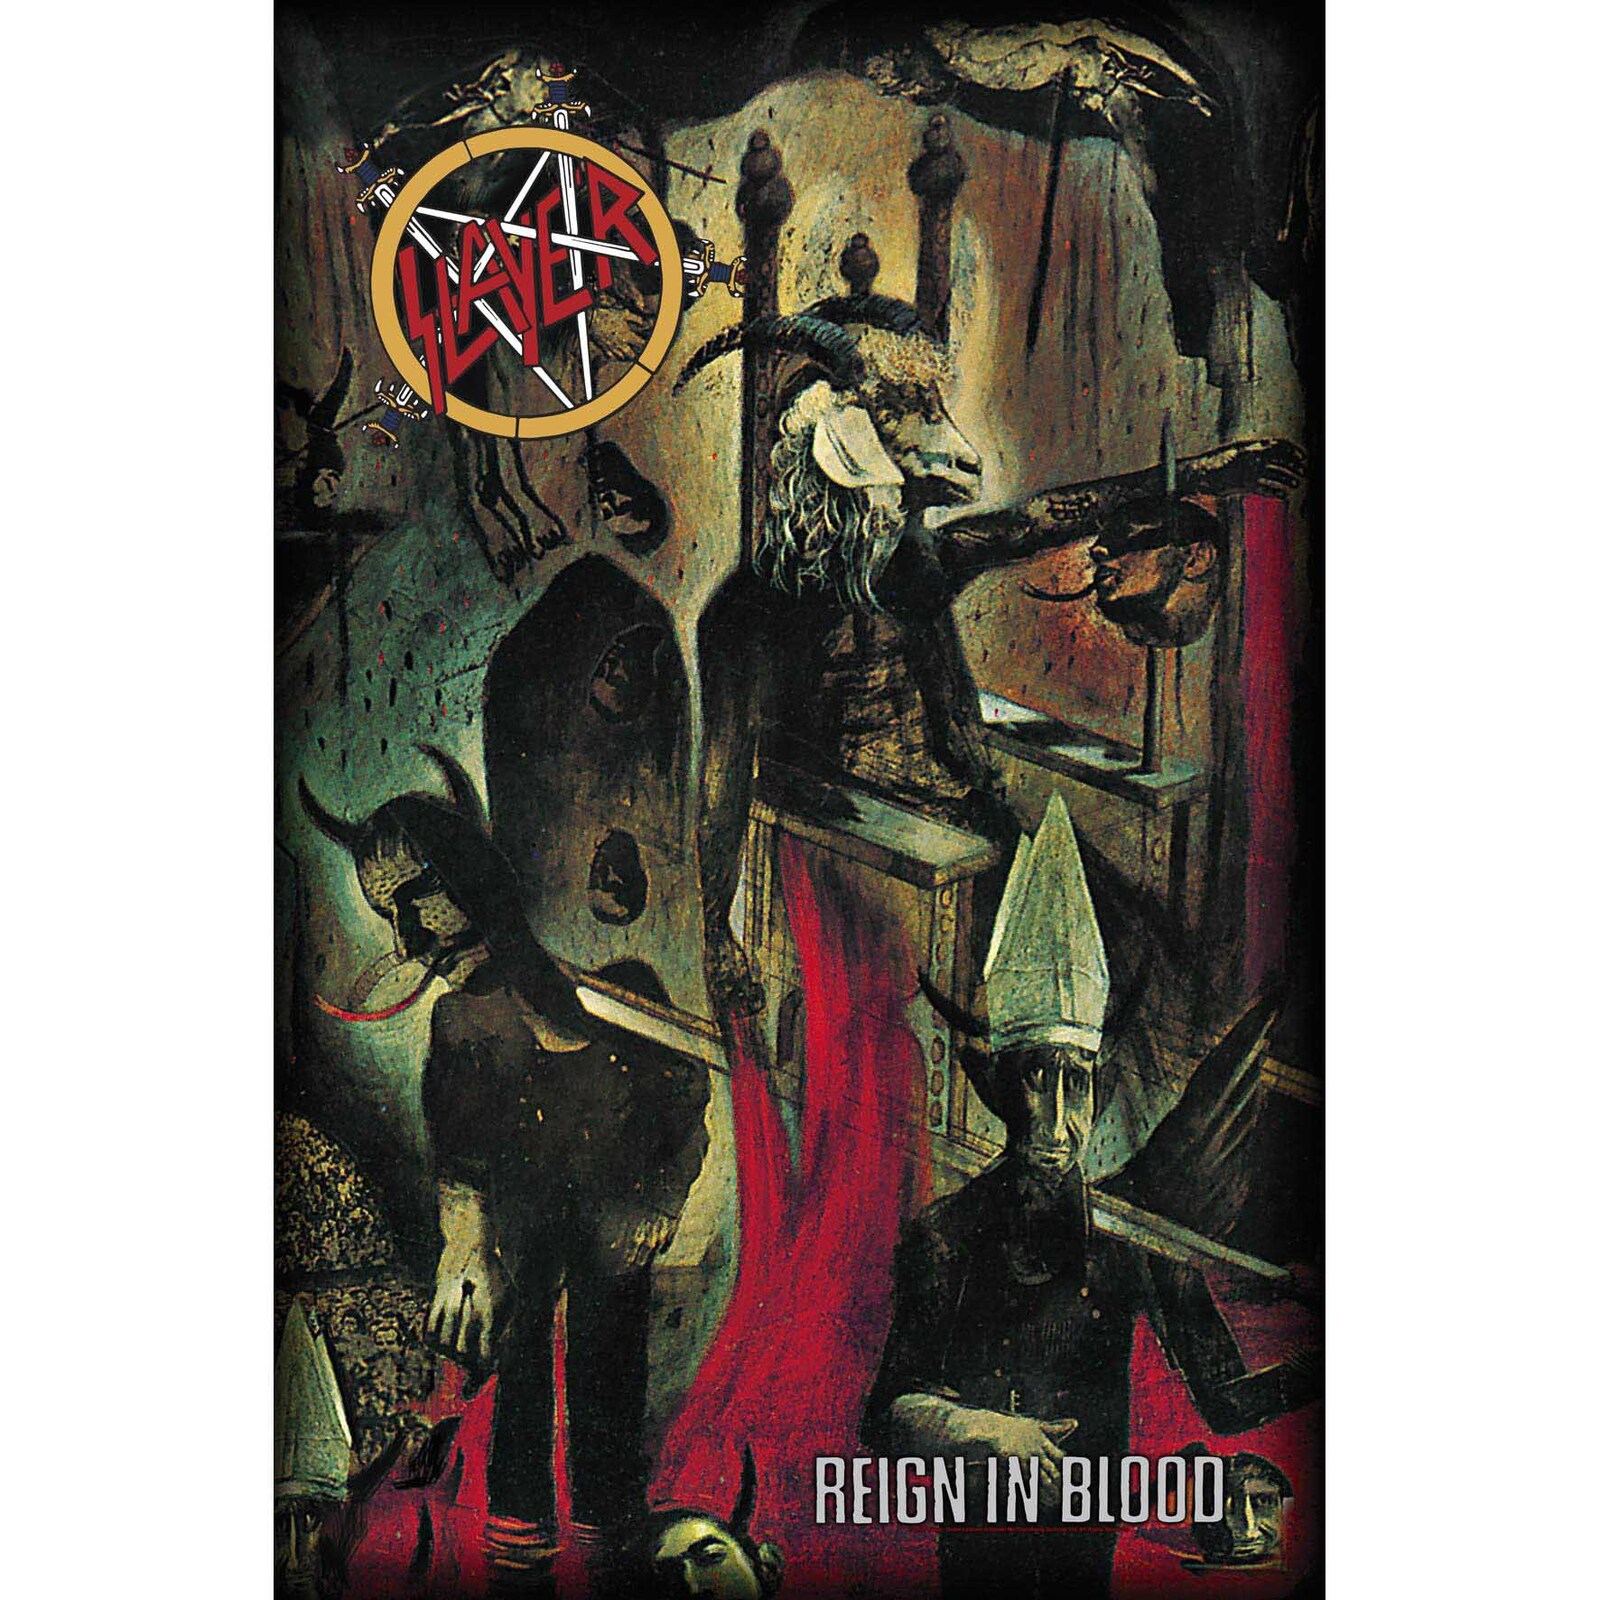 Slayer Reign In Blood LP Album Art Jigsaw Puzzle New Official 